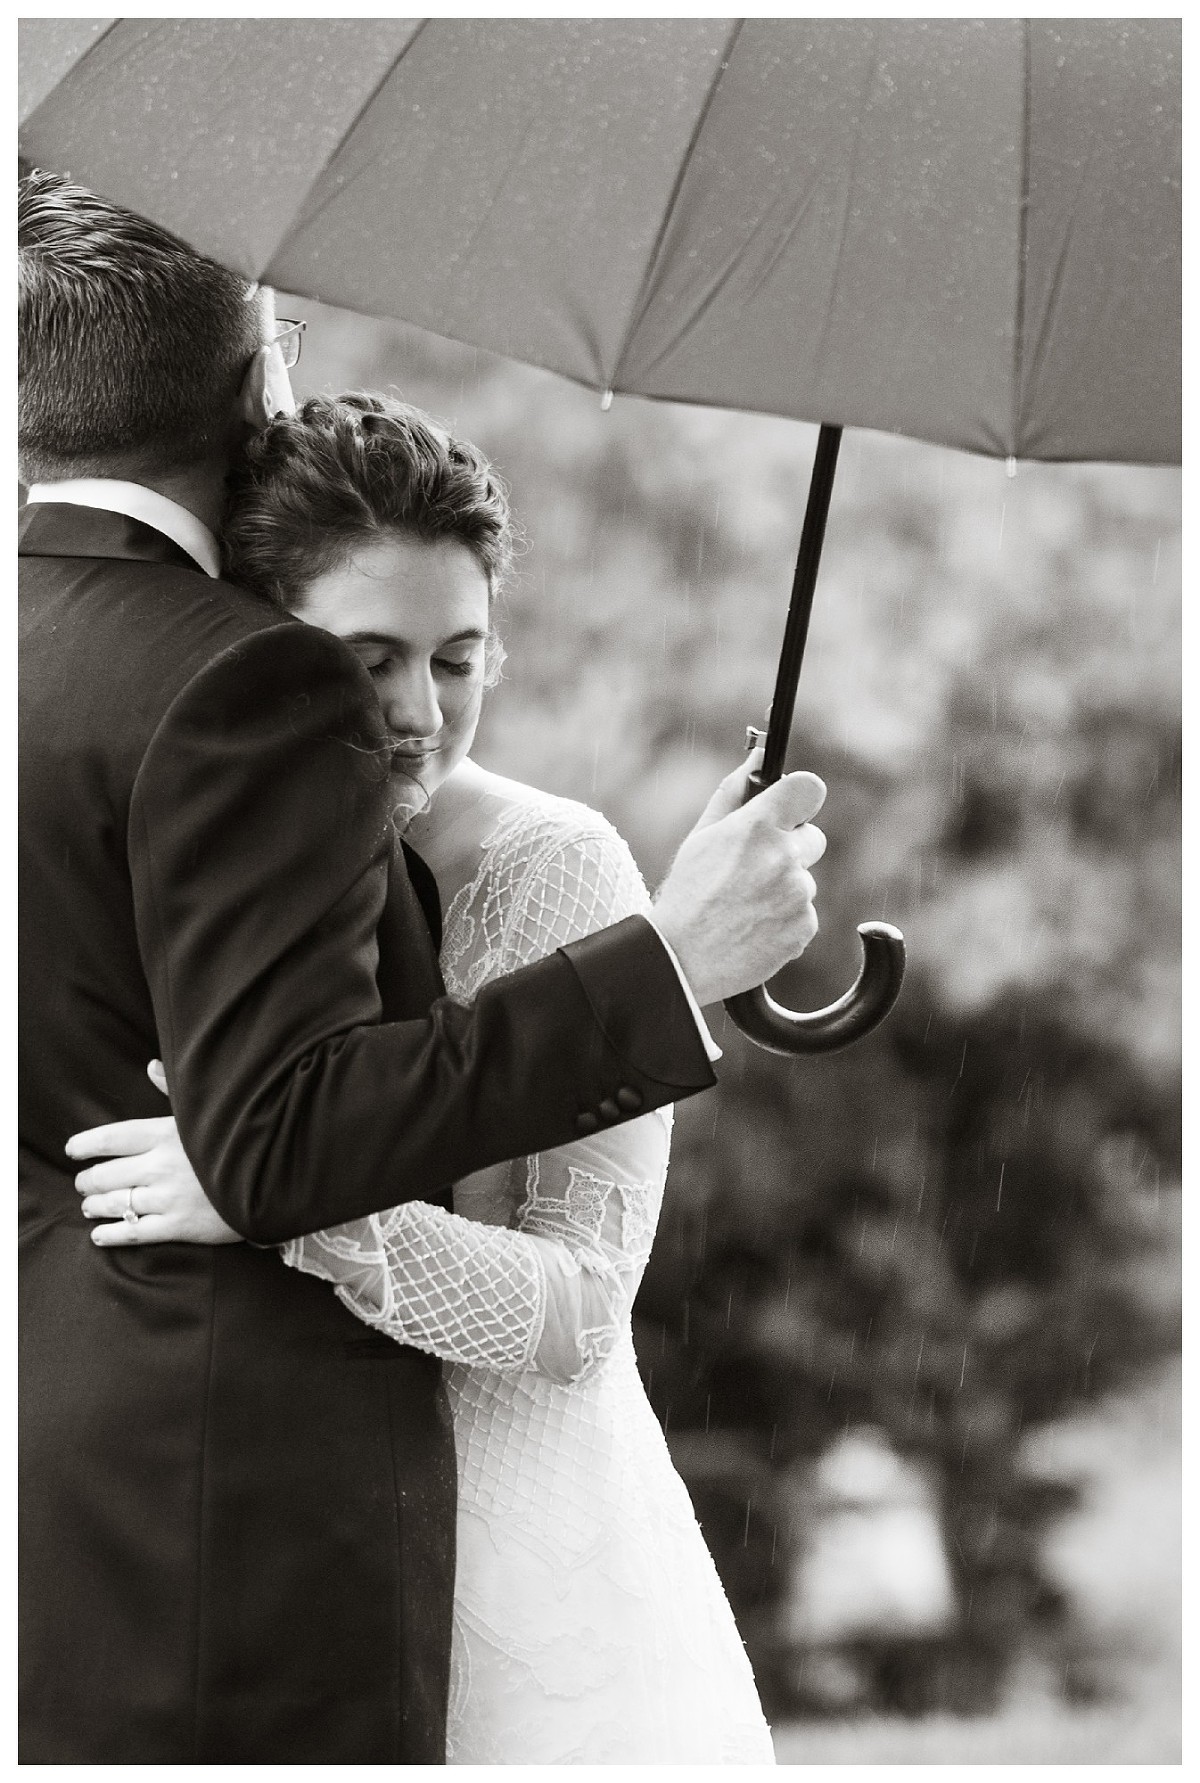 A couple embraces on their wedding day.